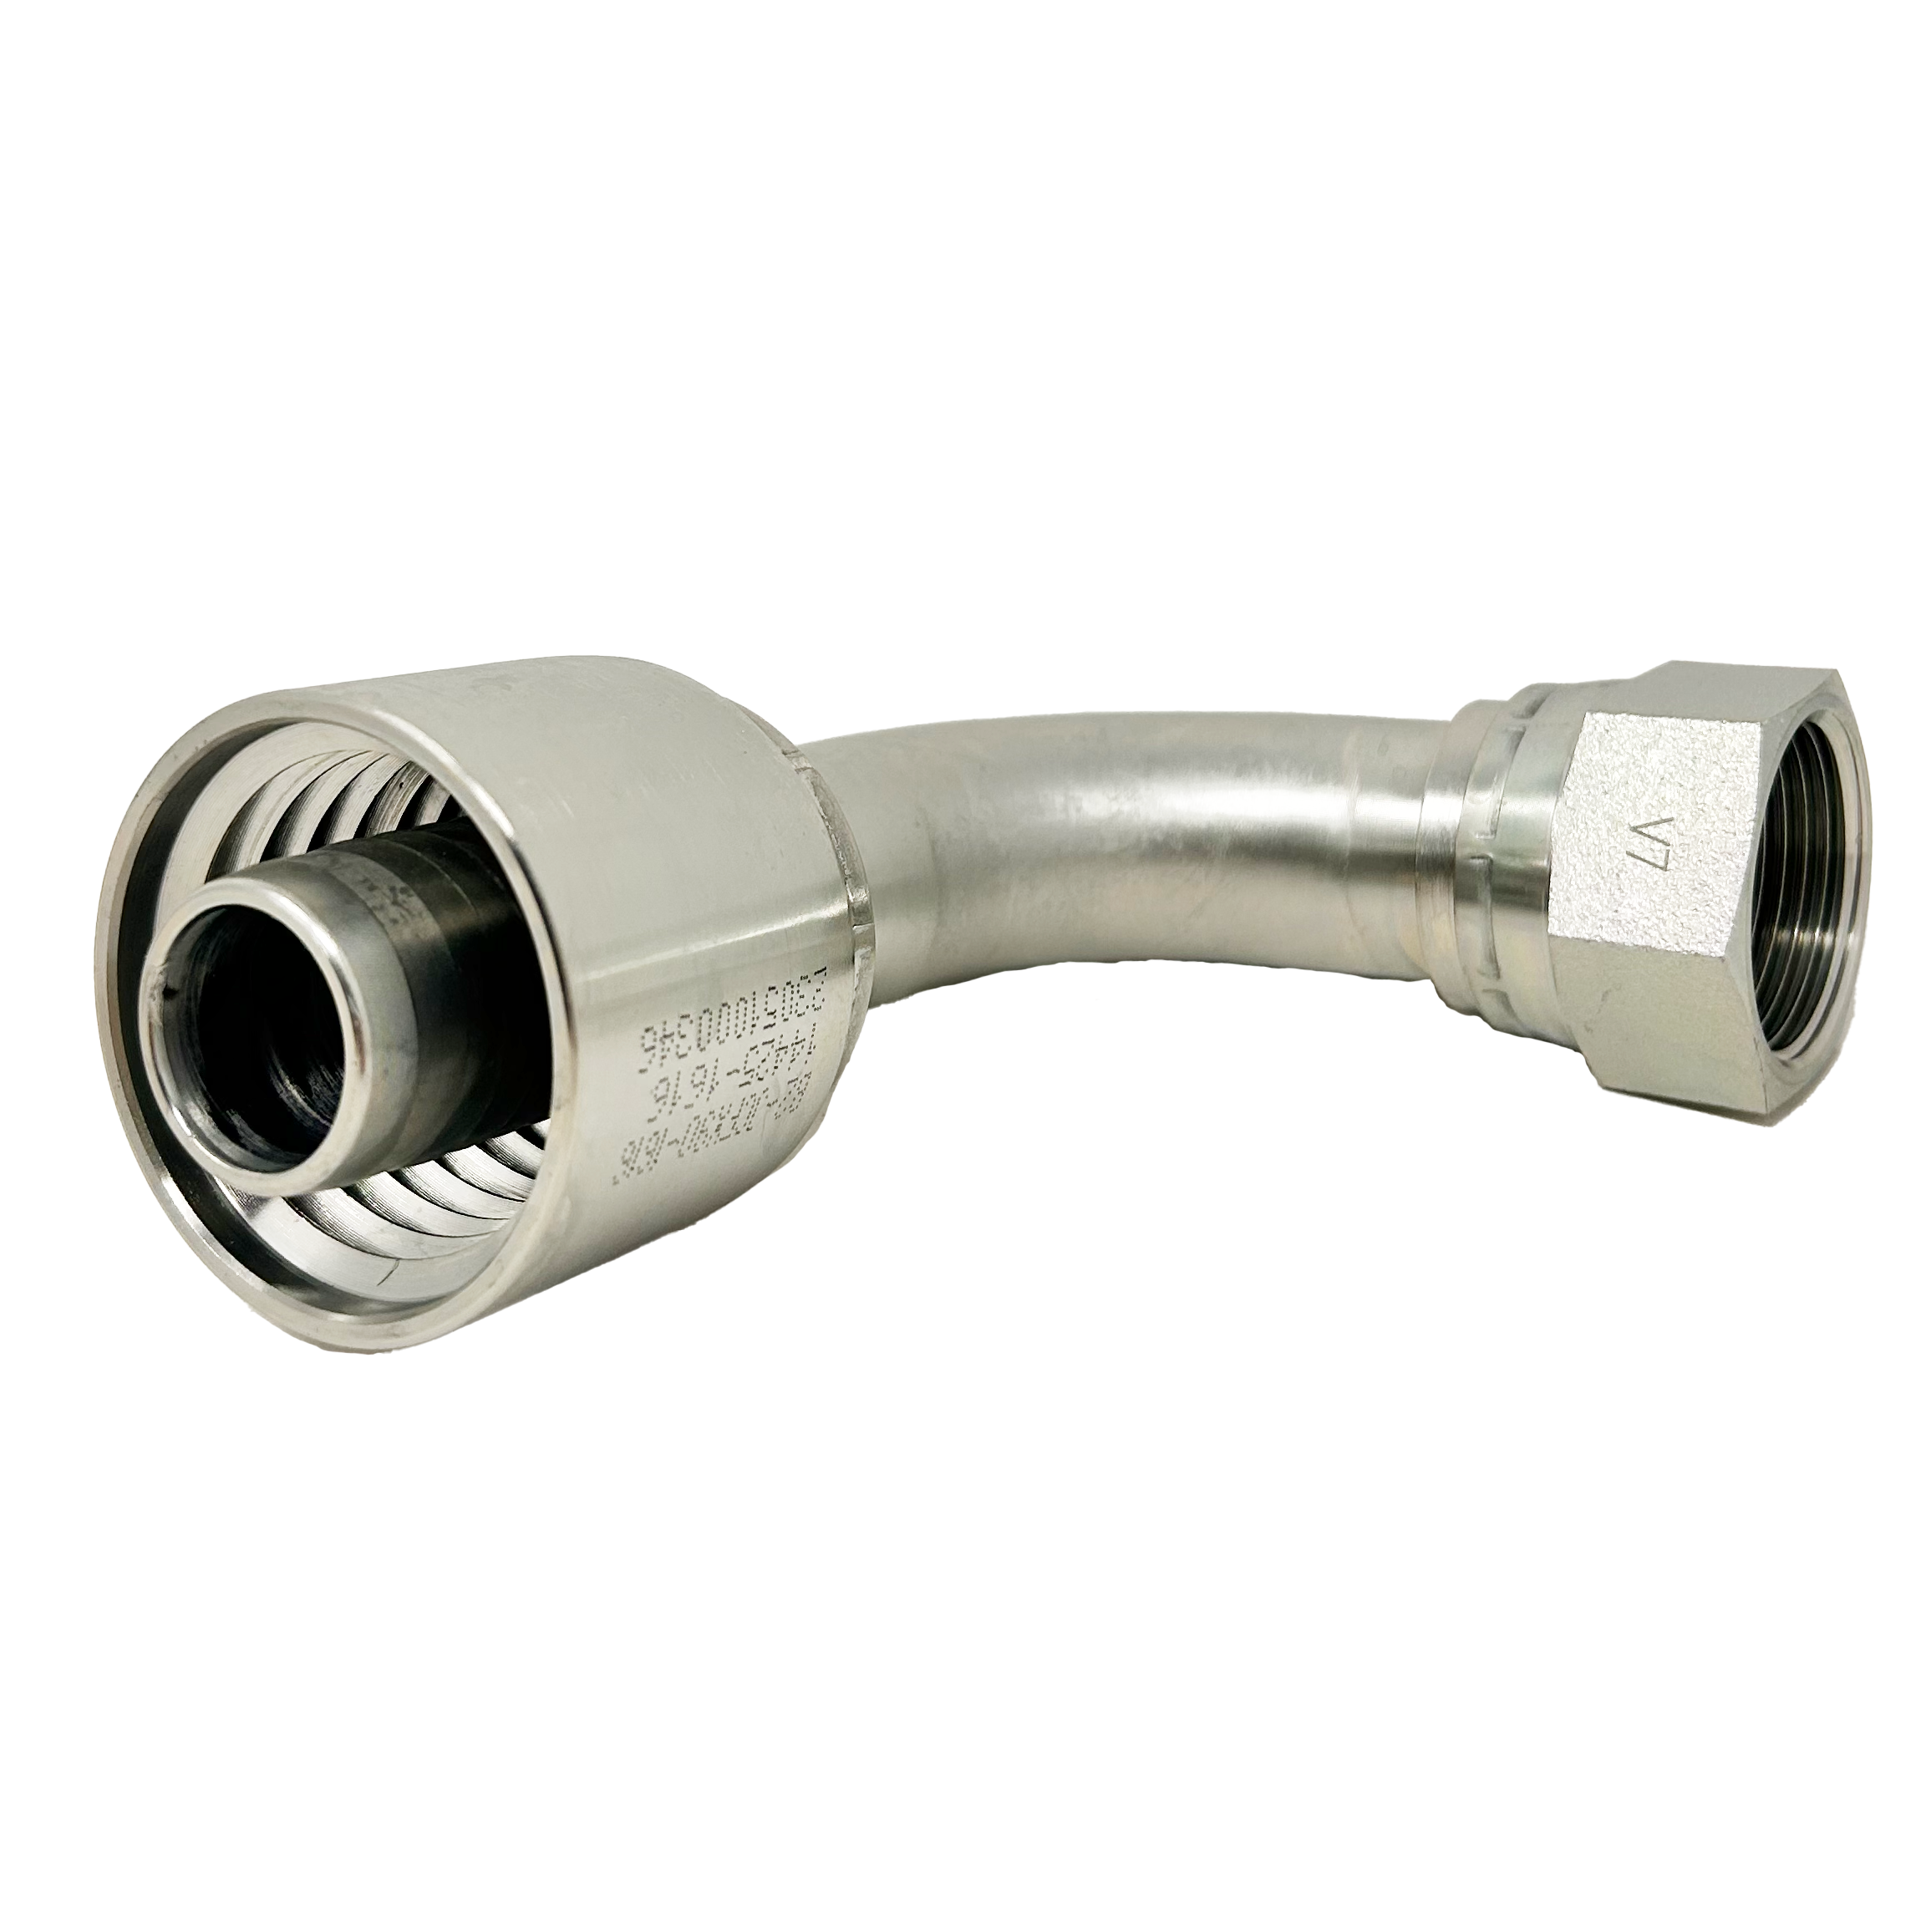 B2-JCFX90-0506: Continental Hose Fitting, 0.3125 (5/16") Hose ID x 9/16-18 Female JIC, 90-Degree Swivel Connection